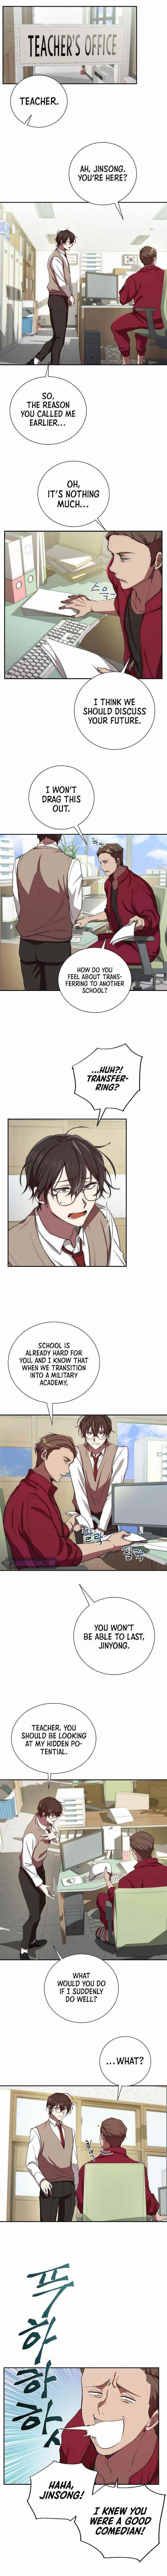 My School Life Pretending to Be a Worthless Person Chapter 2